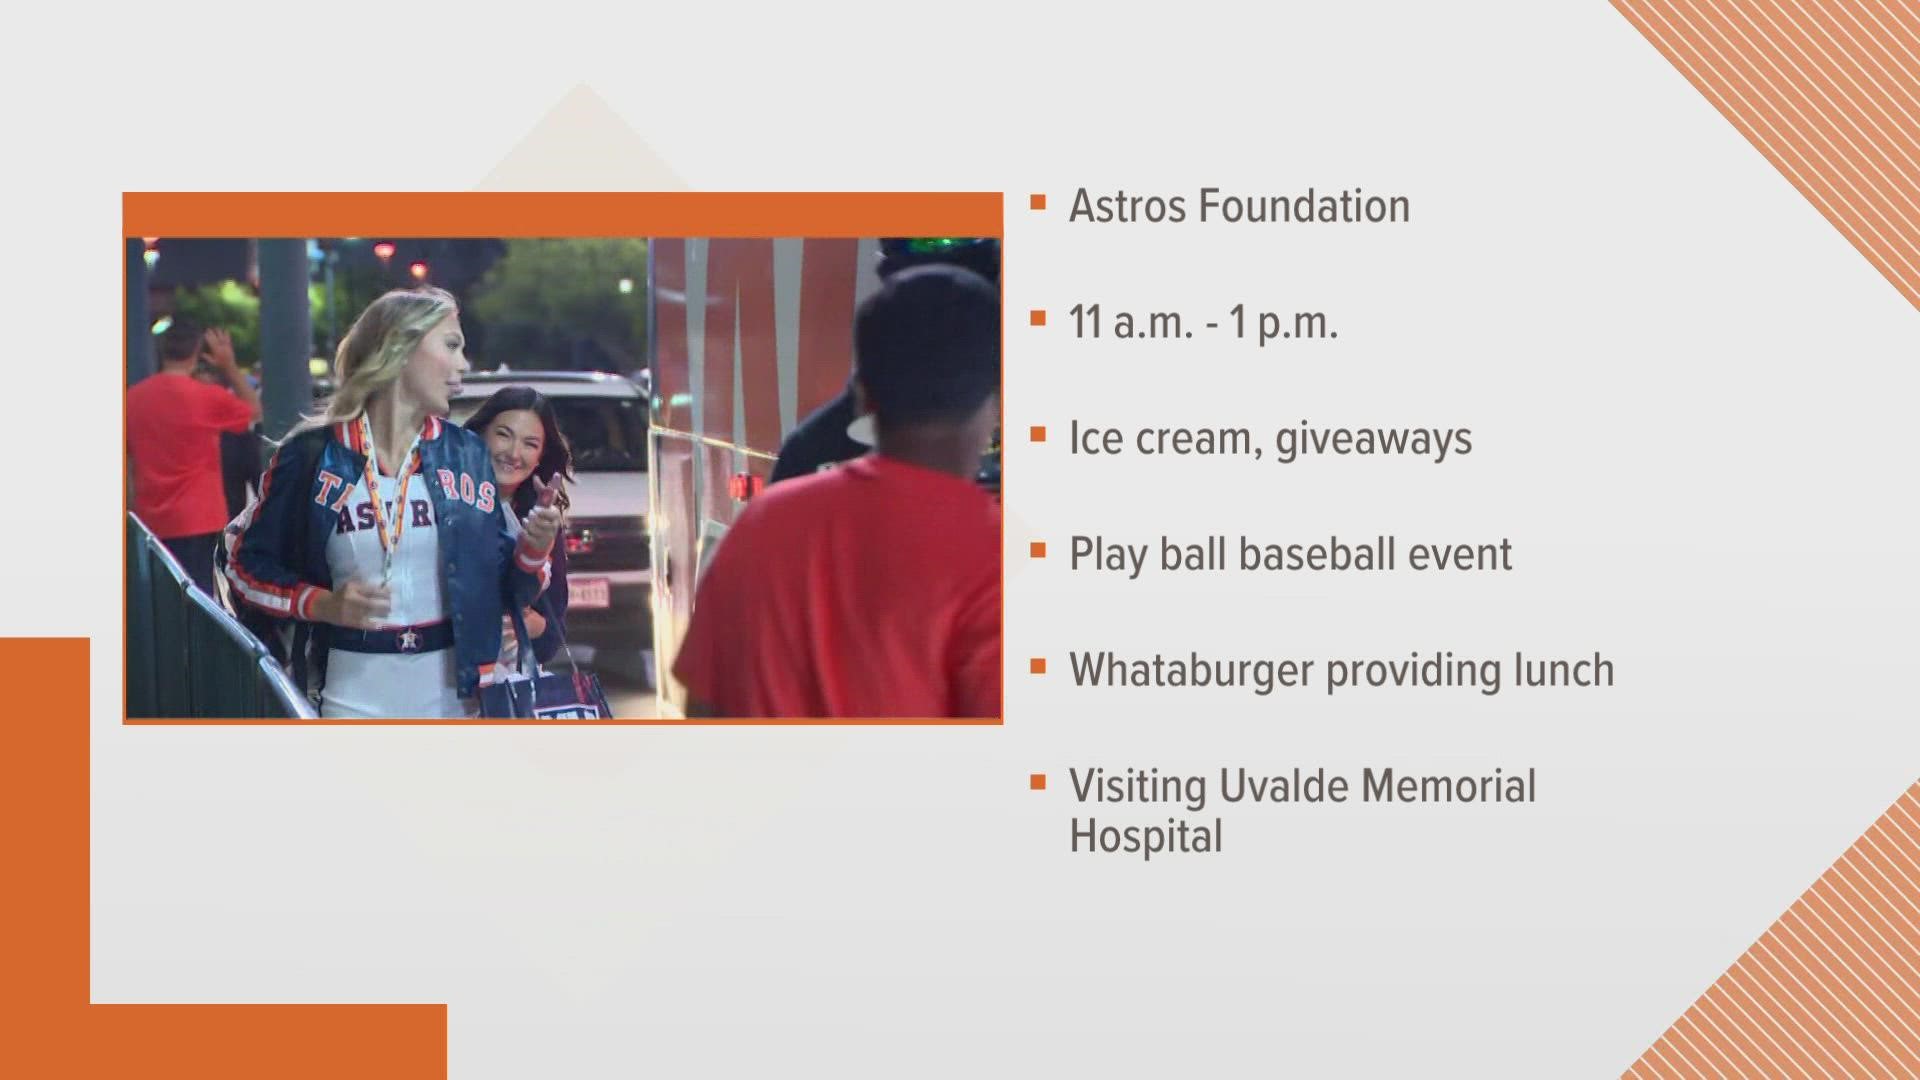 The Astros Foundation has planned various events including an ice cream giveaway at H-E-B, and a baseball event for kids with lunch from Whataburger.